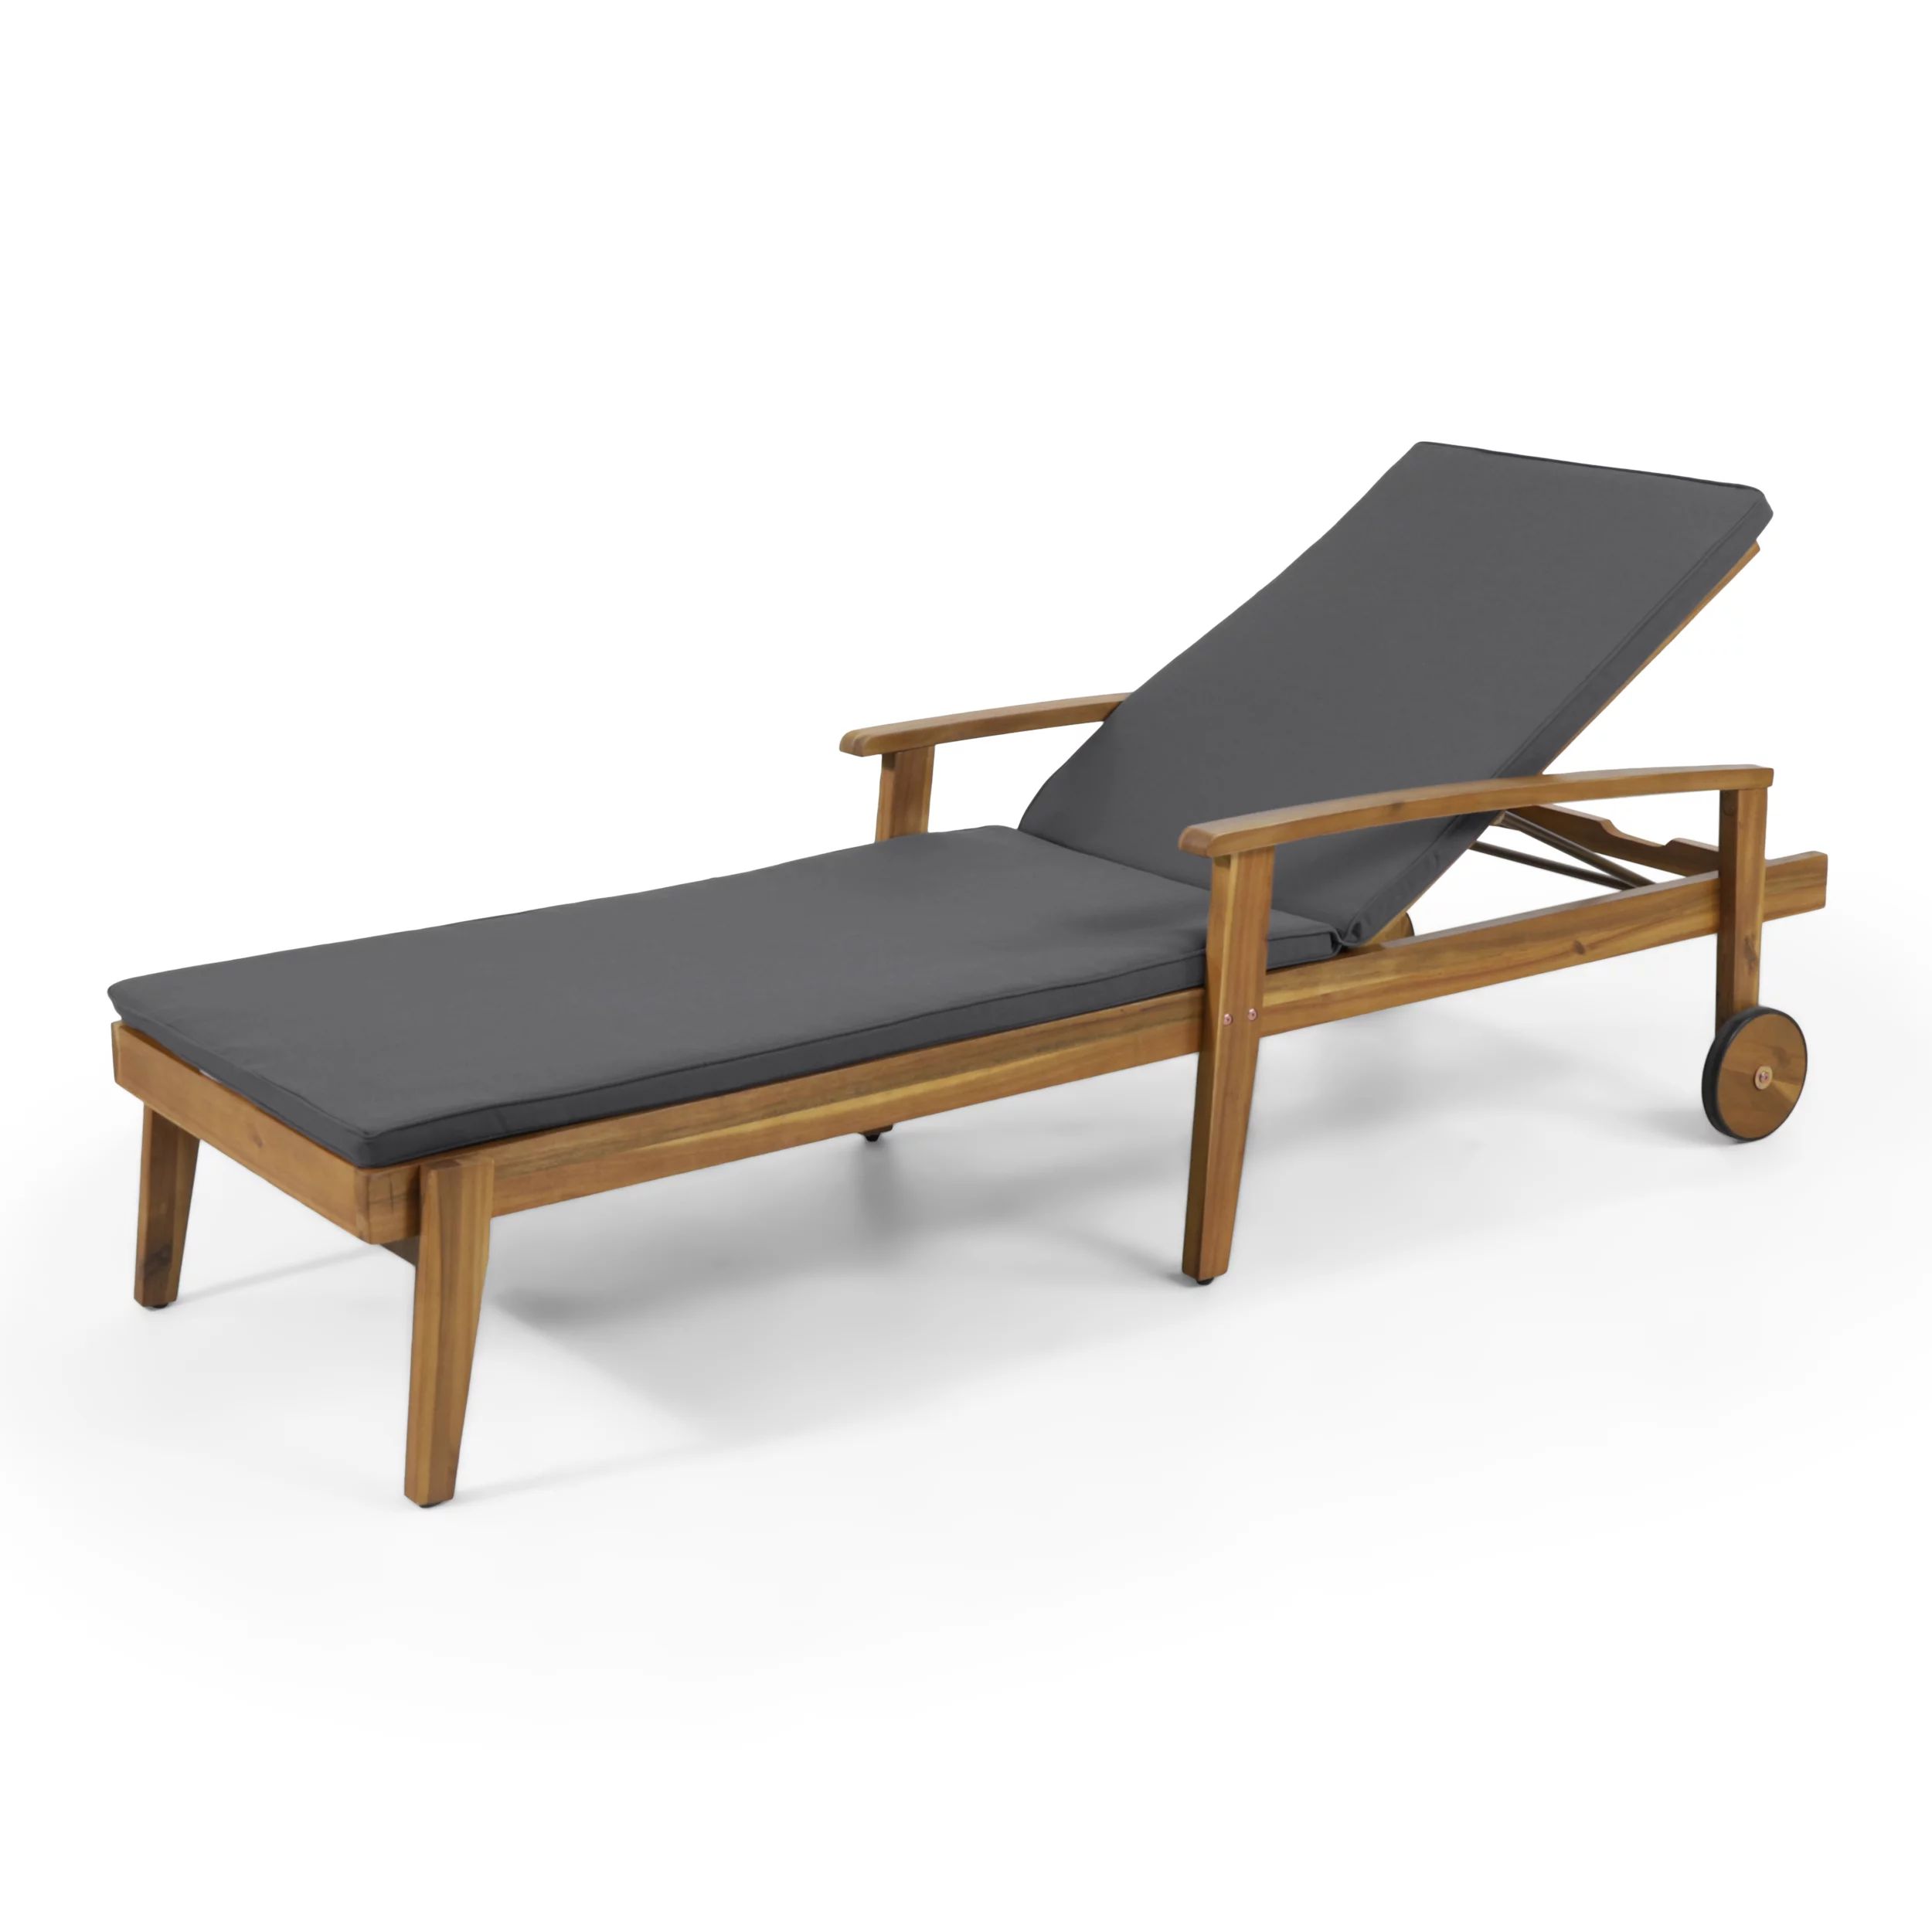 Noble House Multiple Positions Acacia wood Outdoor Chaise Lounge - Dark Gray | Walmart (US)